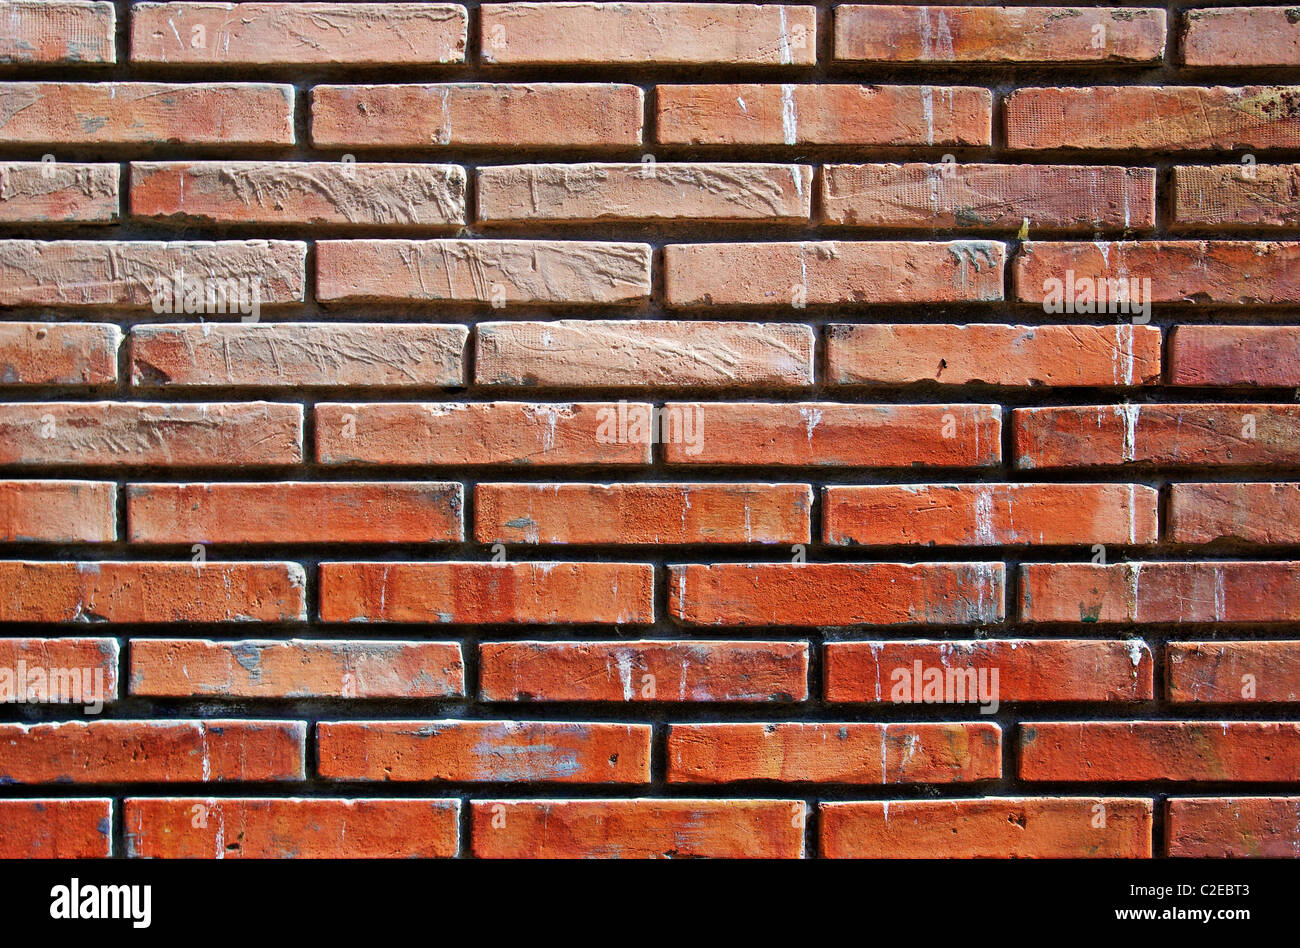 Abstract orange wall made of bricks. Good as background or backdrop. Stock Photo